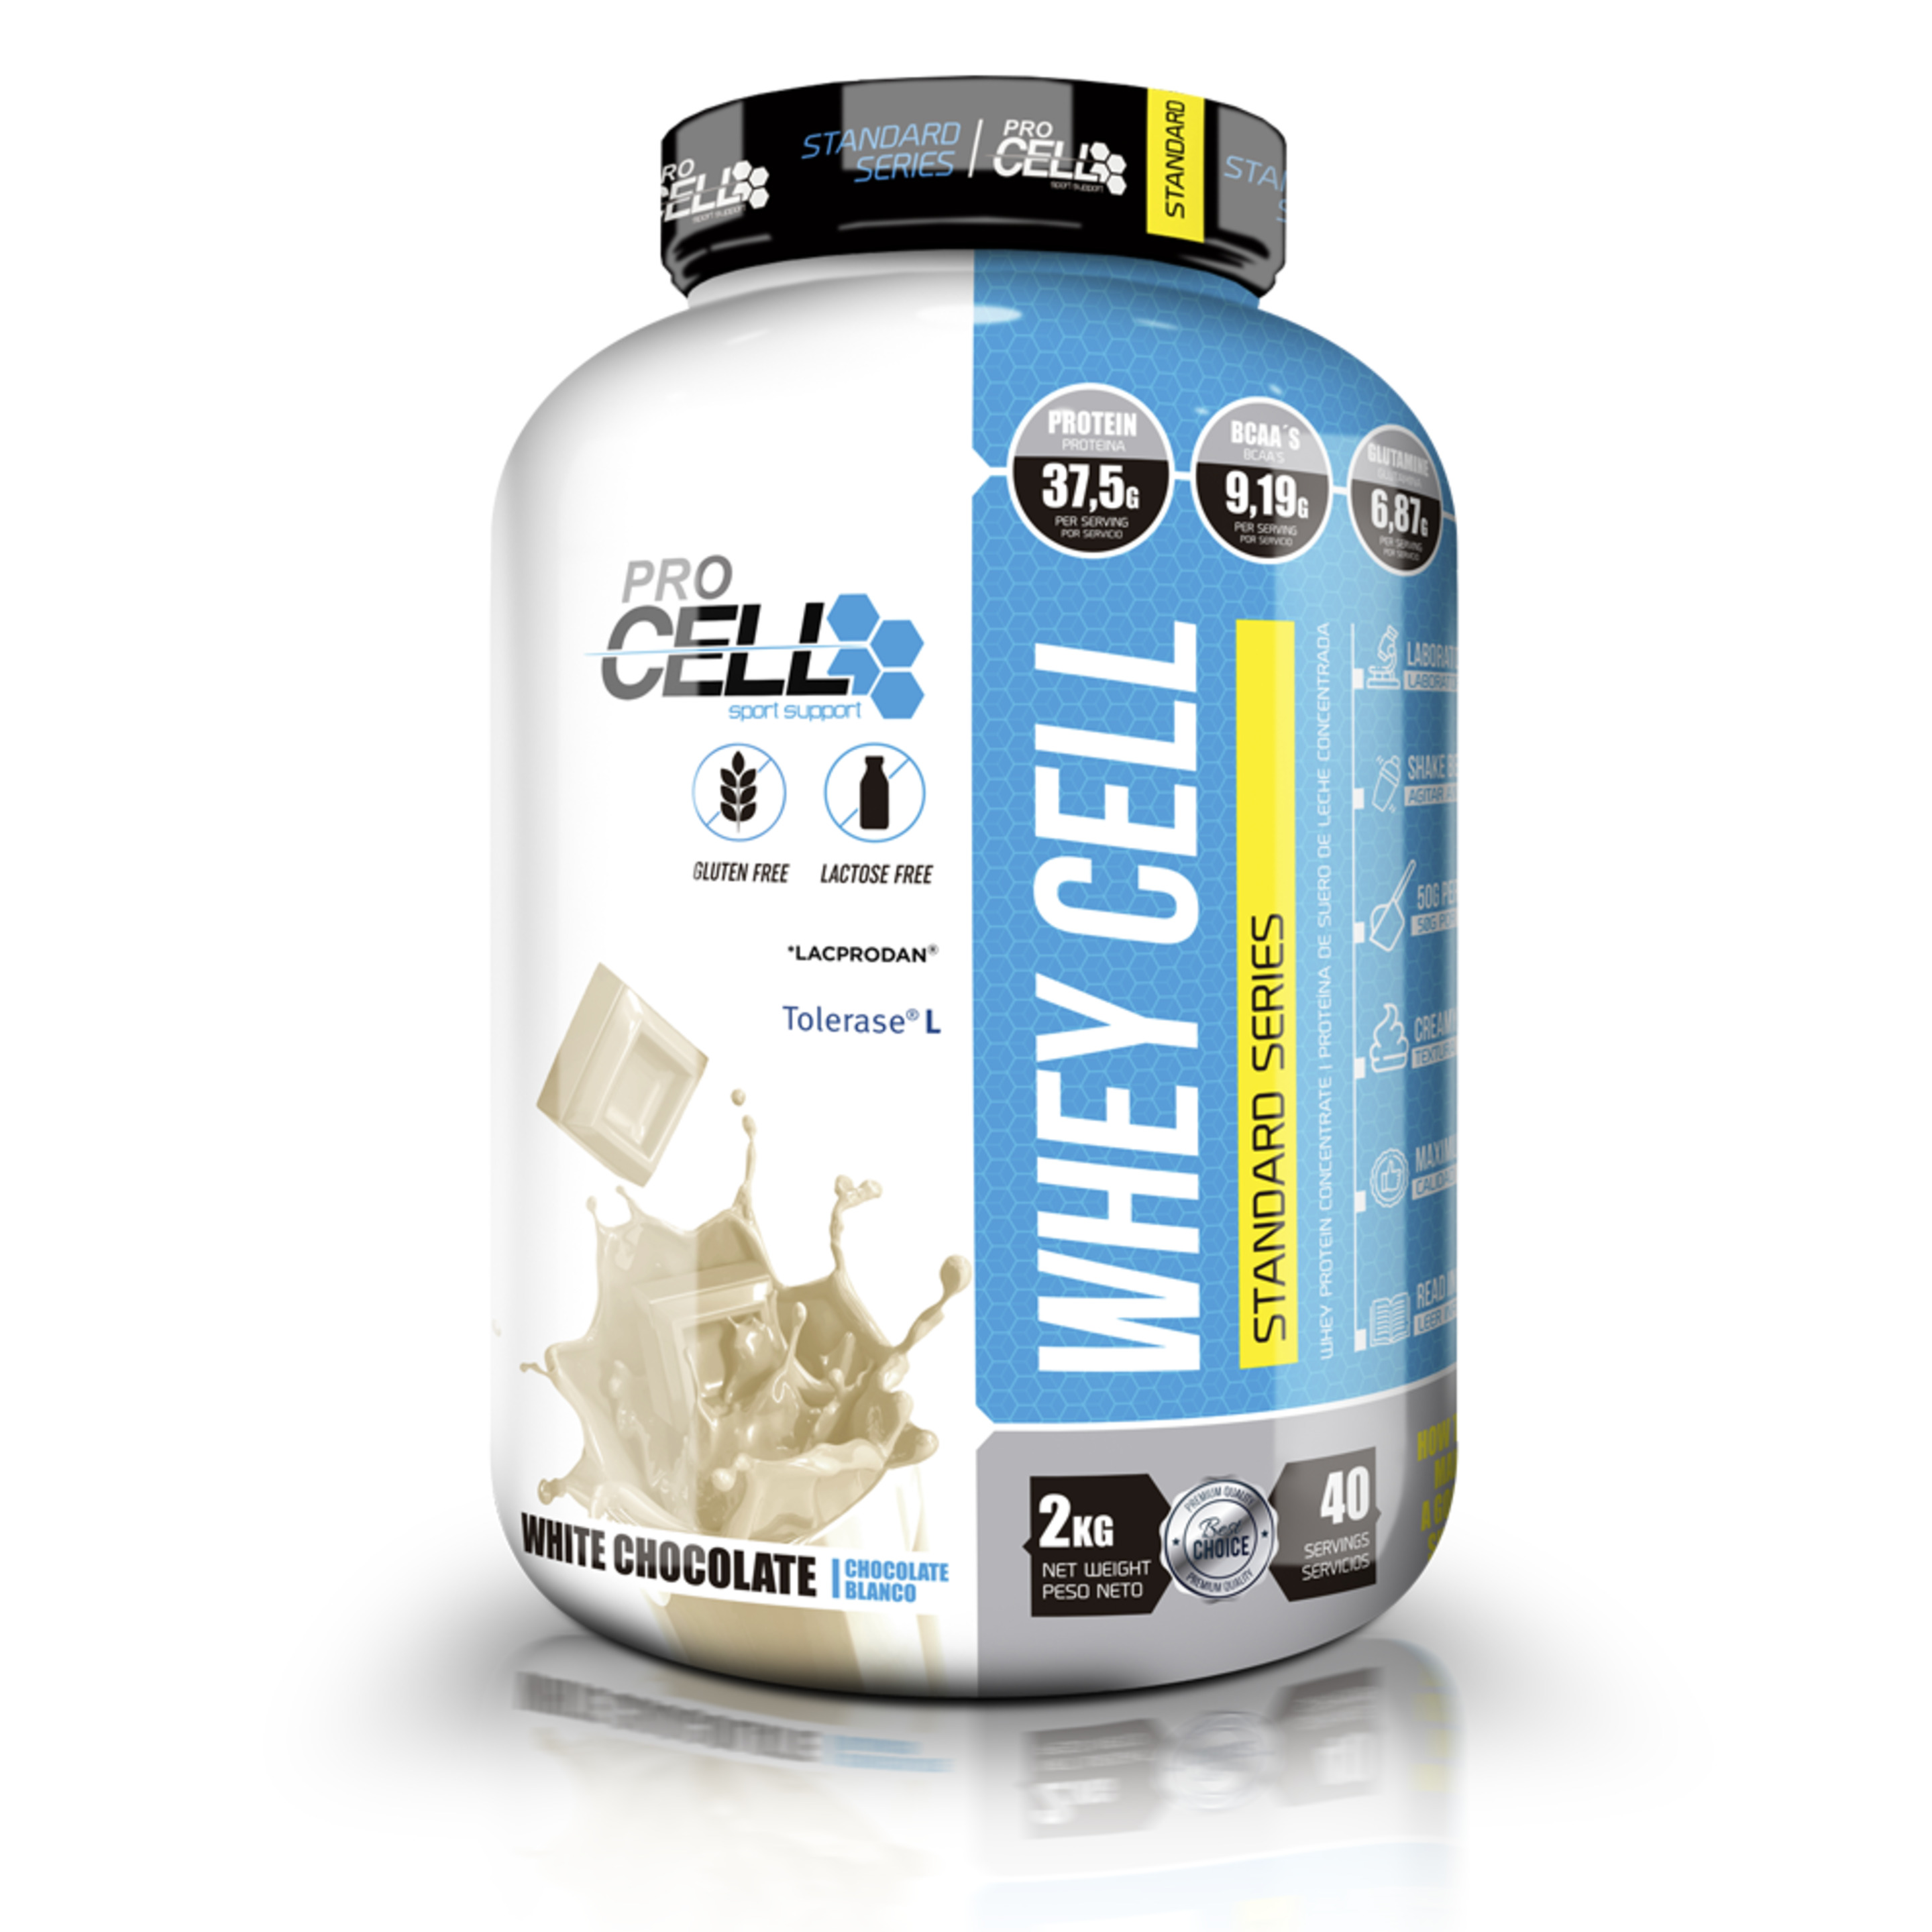 Whey Cell 2kg  MKP